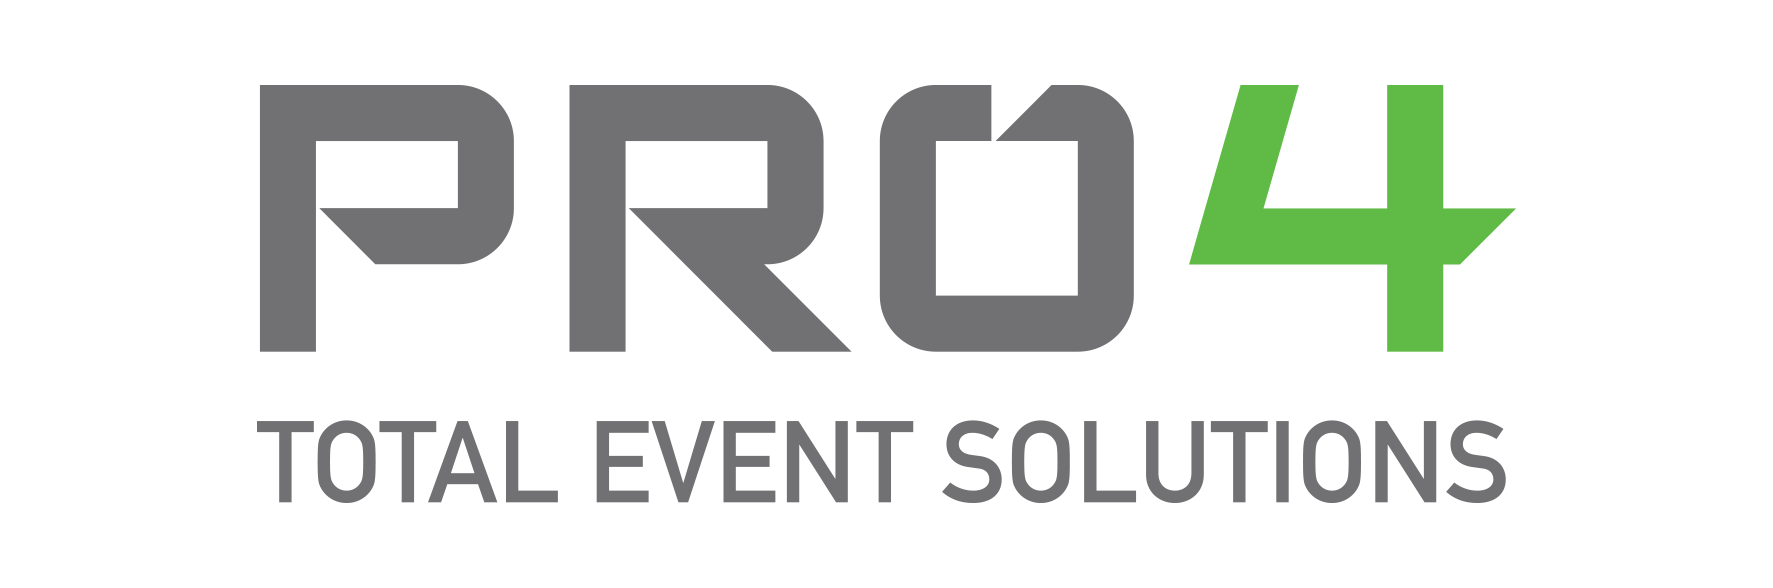 Pro4 Total Event Solutions